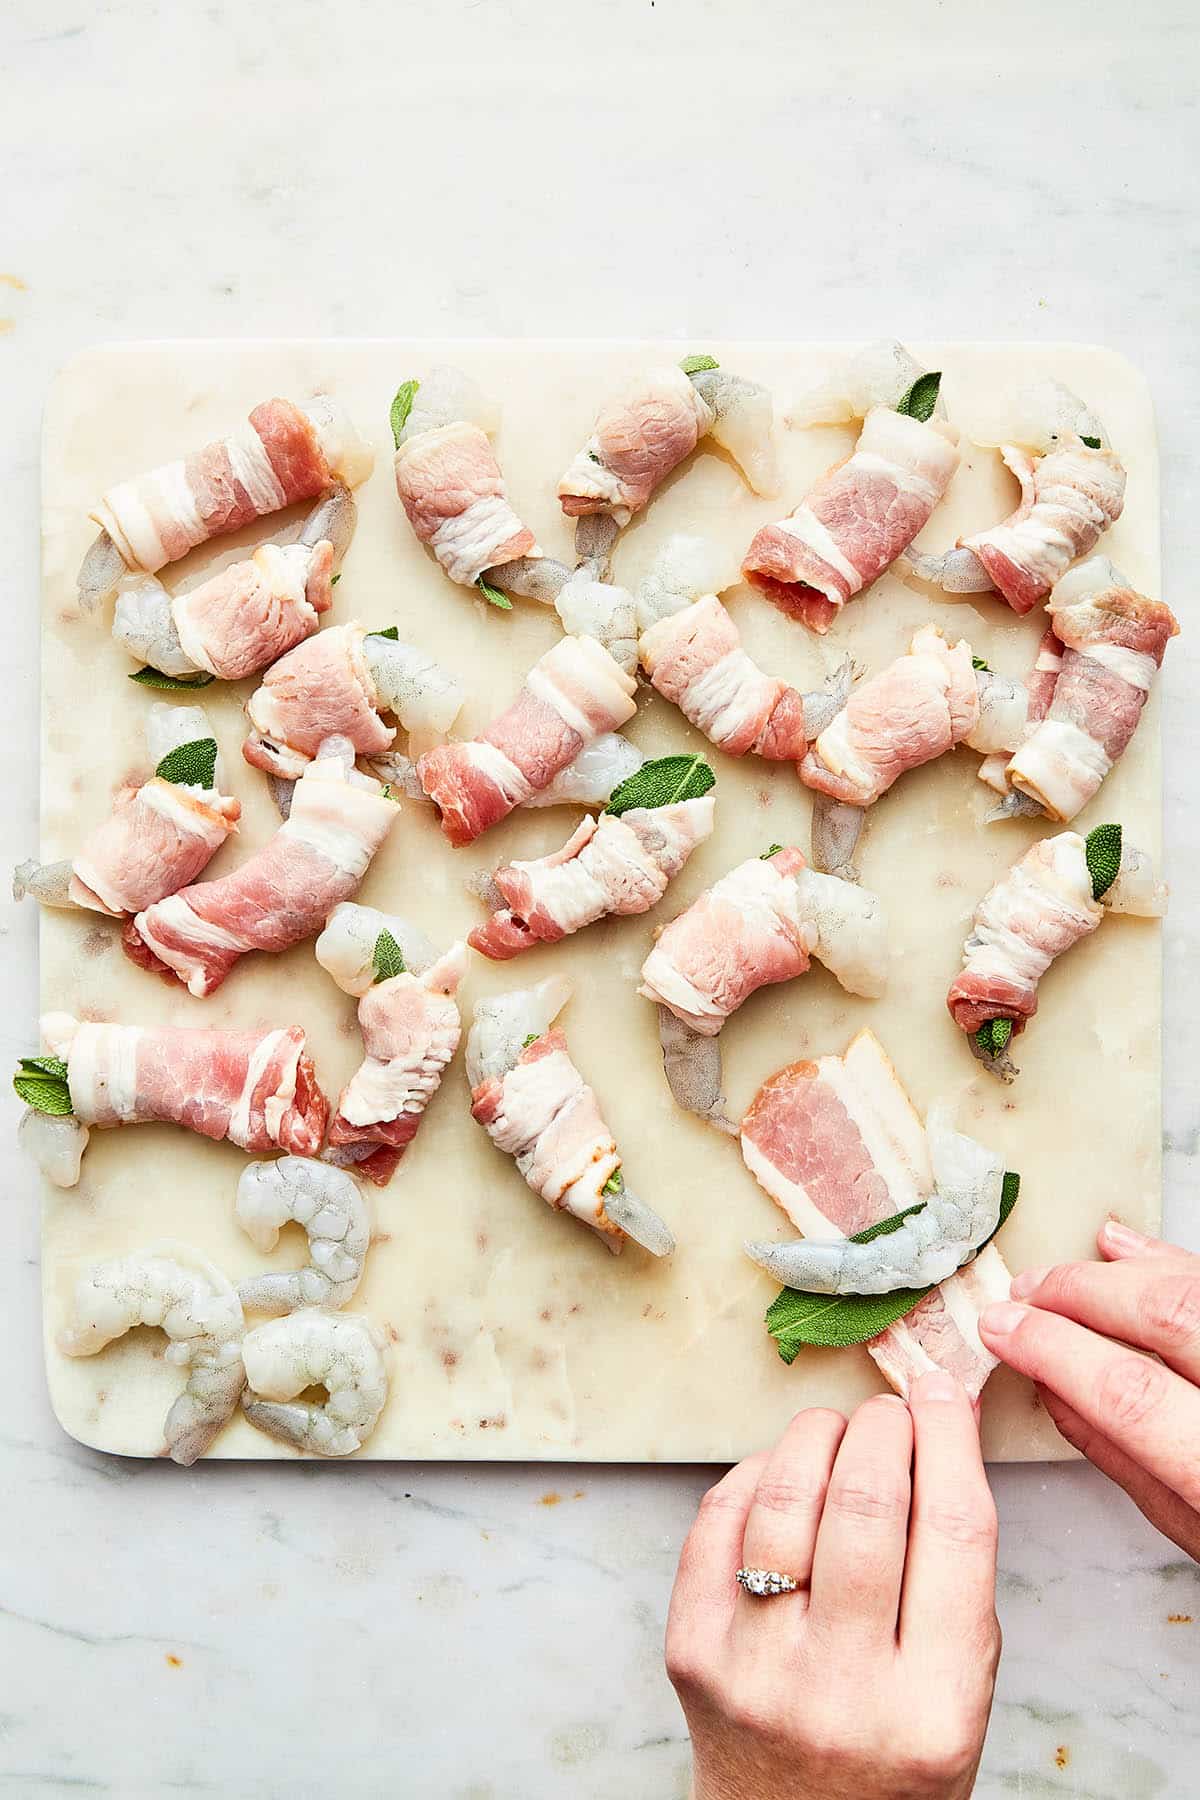 Hands about to roll a shrimp topped with a piece of fresh sage inside a small strip of bacon.